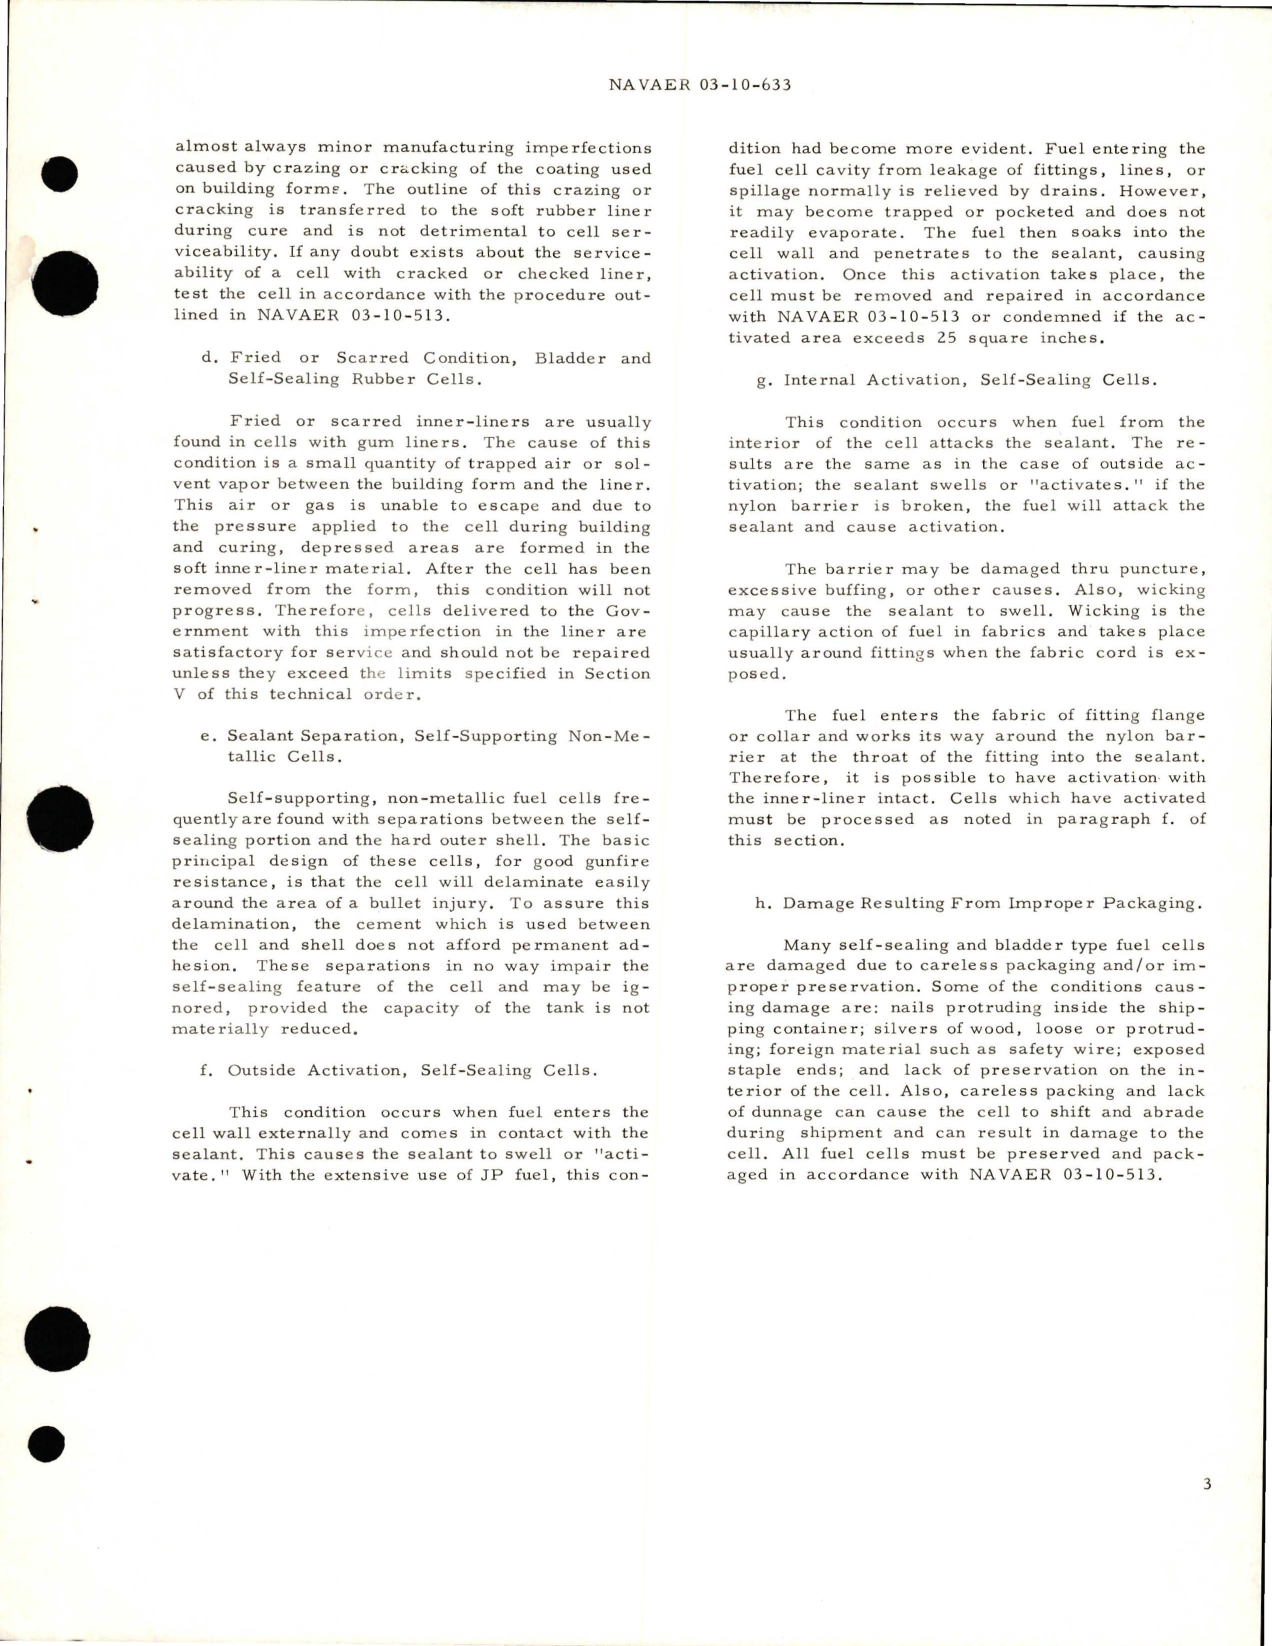 Sample page 7 from AirCorps Library document: Handbook of Inspection Standards for Rubber and Nylon Fuel Cells